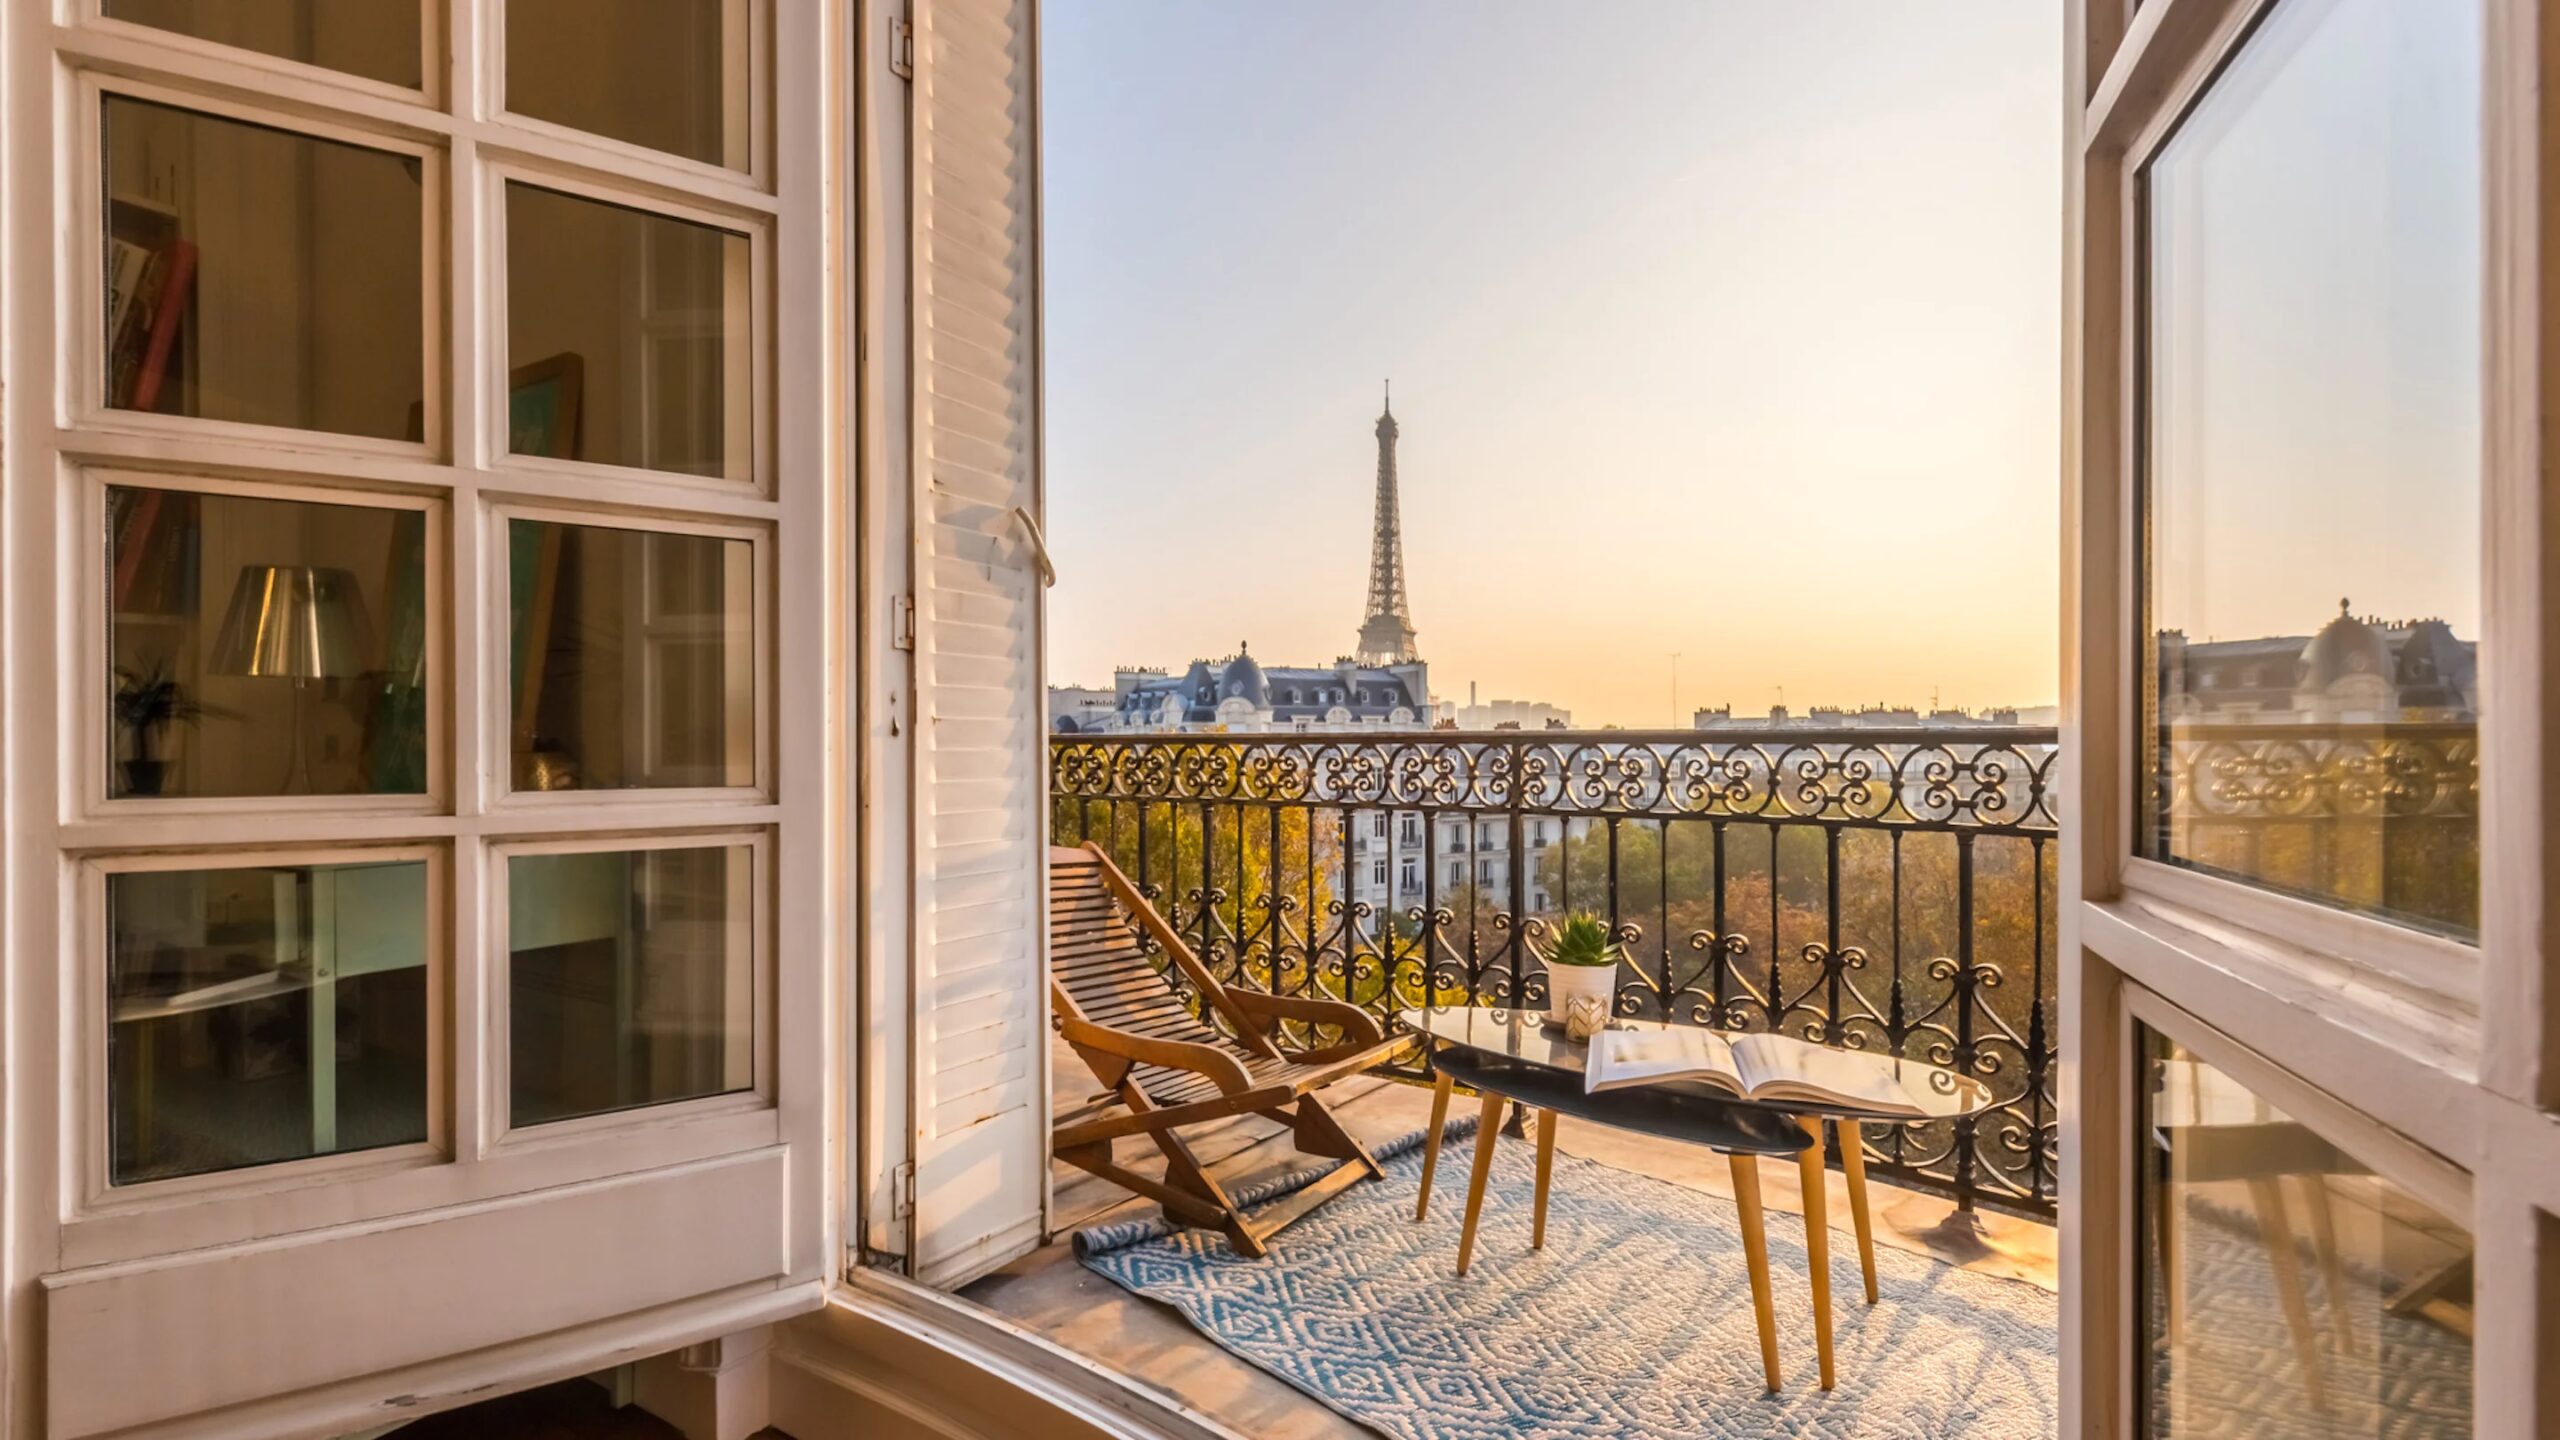 Paris AirBnB with Eiffel Tower Sunset Views from Balcony